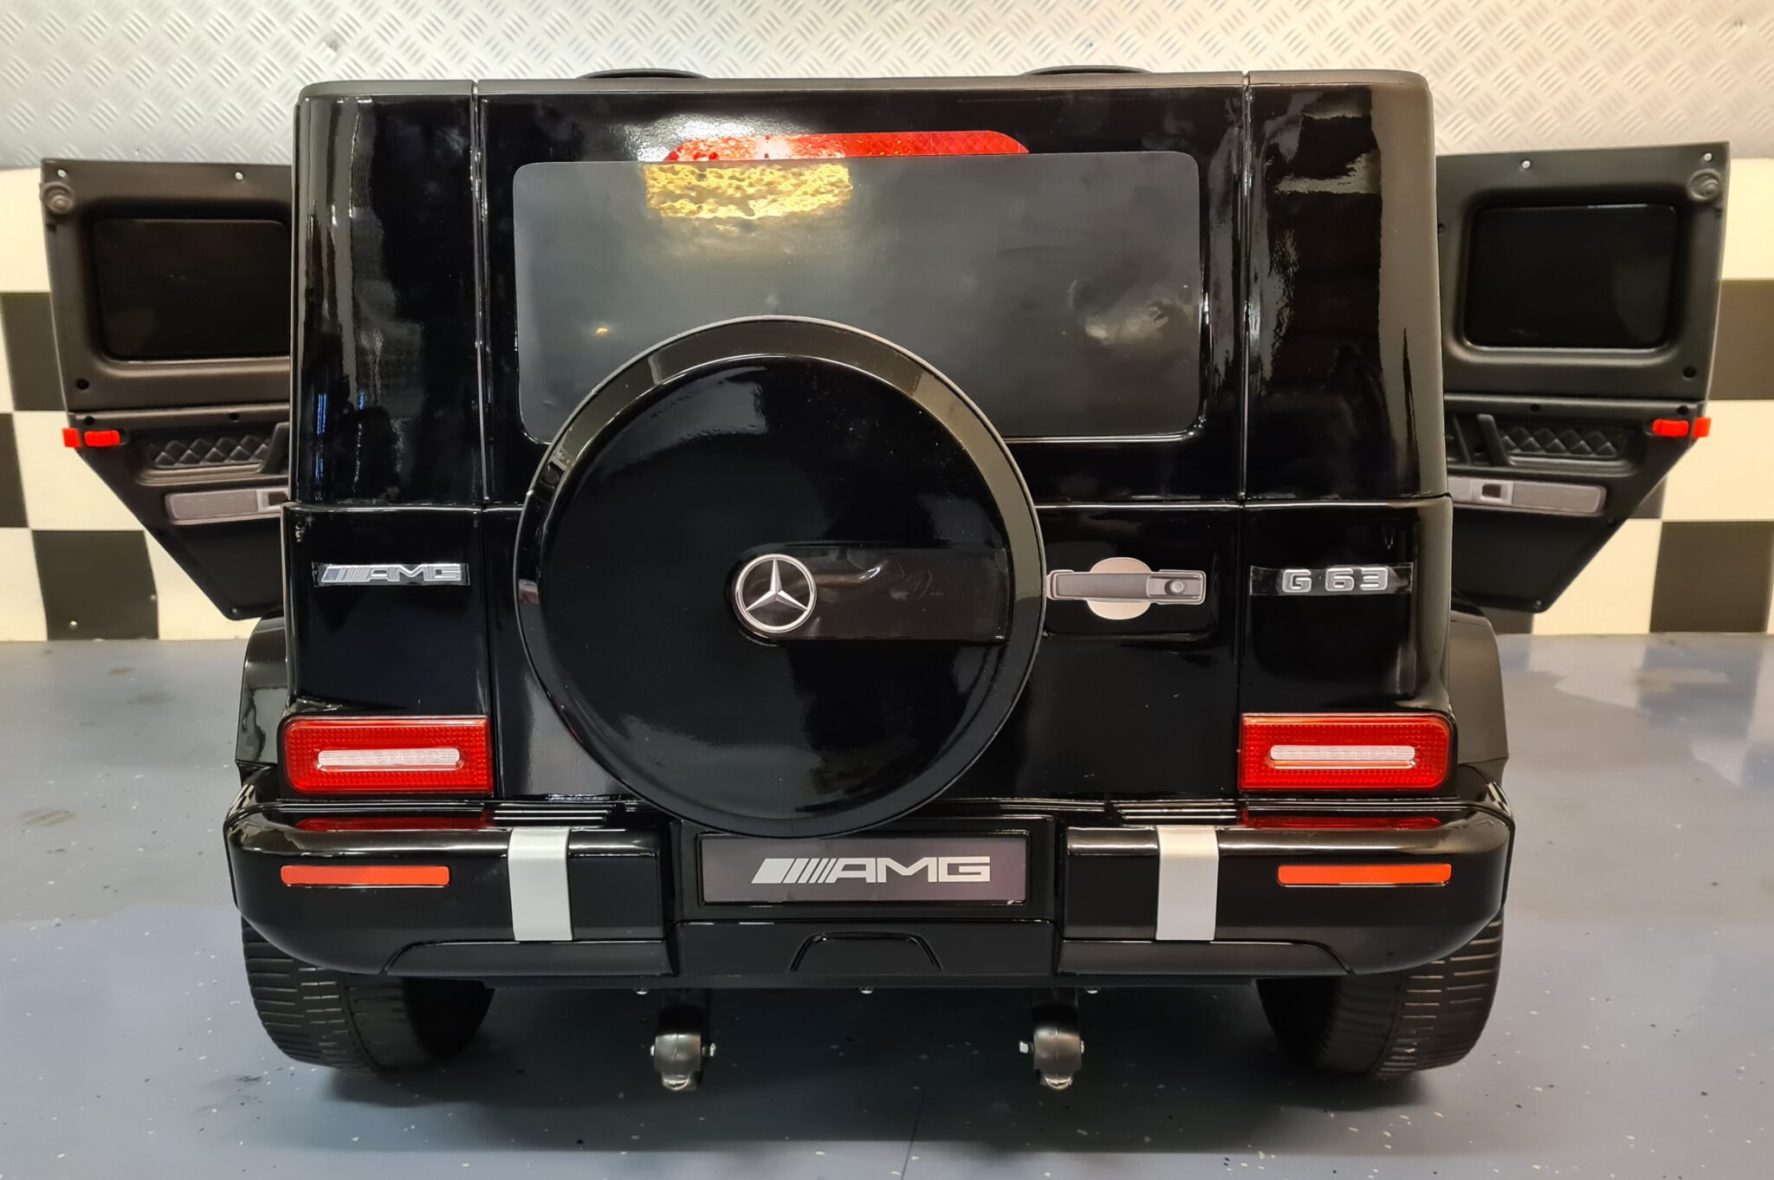 Accu-auto-kind-mercedes-G63-2-persoons